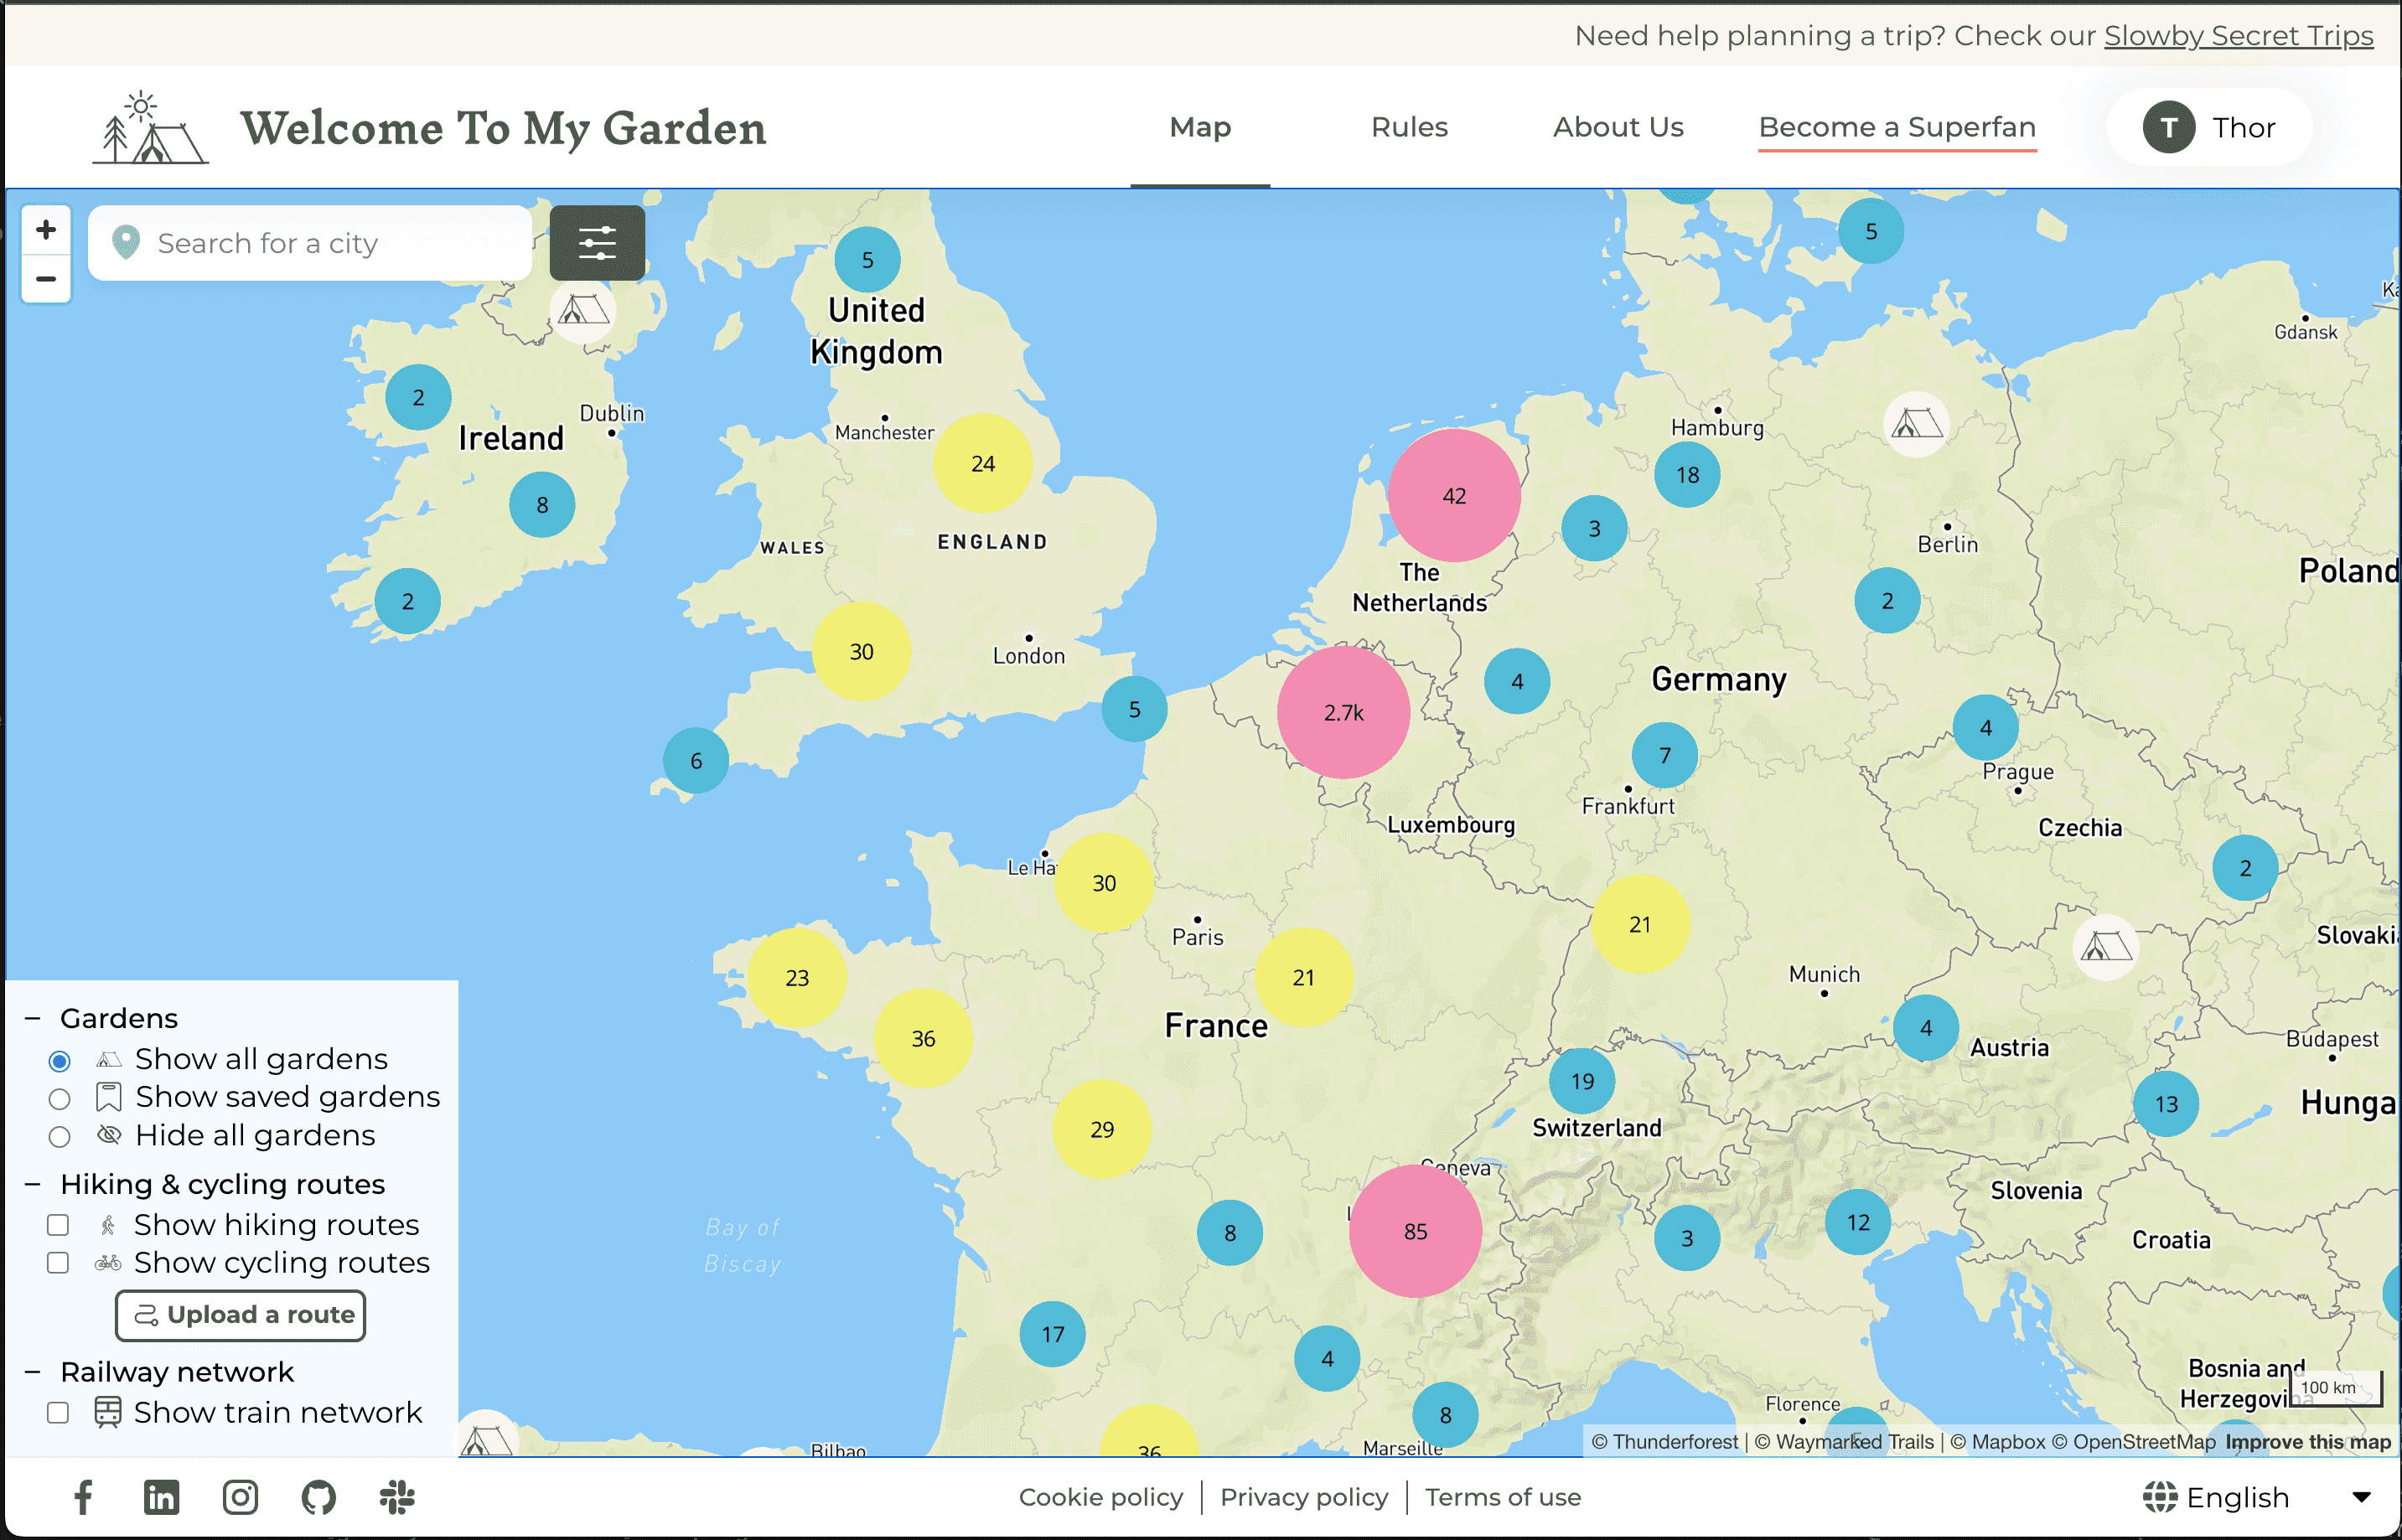 Welcome To My Garden is a free community network where people can share their garden with other slow travellers and plan their next trips. WTMG has an intuitive map with lots of wonderful gardens (mostly in and around Belgium), a simple chat system, and it integrates with [Waymarked Trails](https://waymarkedtrails.org/).

[Superfans](https://welcometomygarden.org/about-superfan), who support us with a yearly membership, also get access to extra tools like uploading `.gpx` files to find gardens along a planned trail, a community space with likeminded travellers, a railway transportation map, and more!